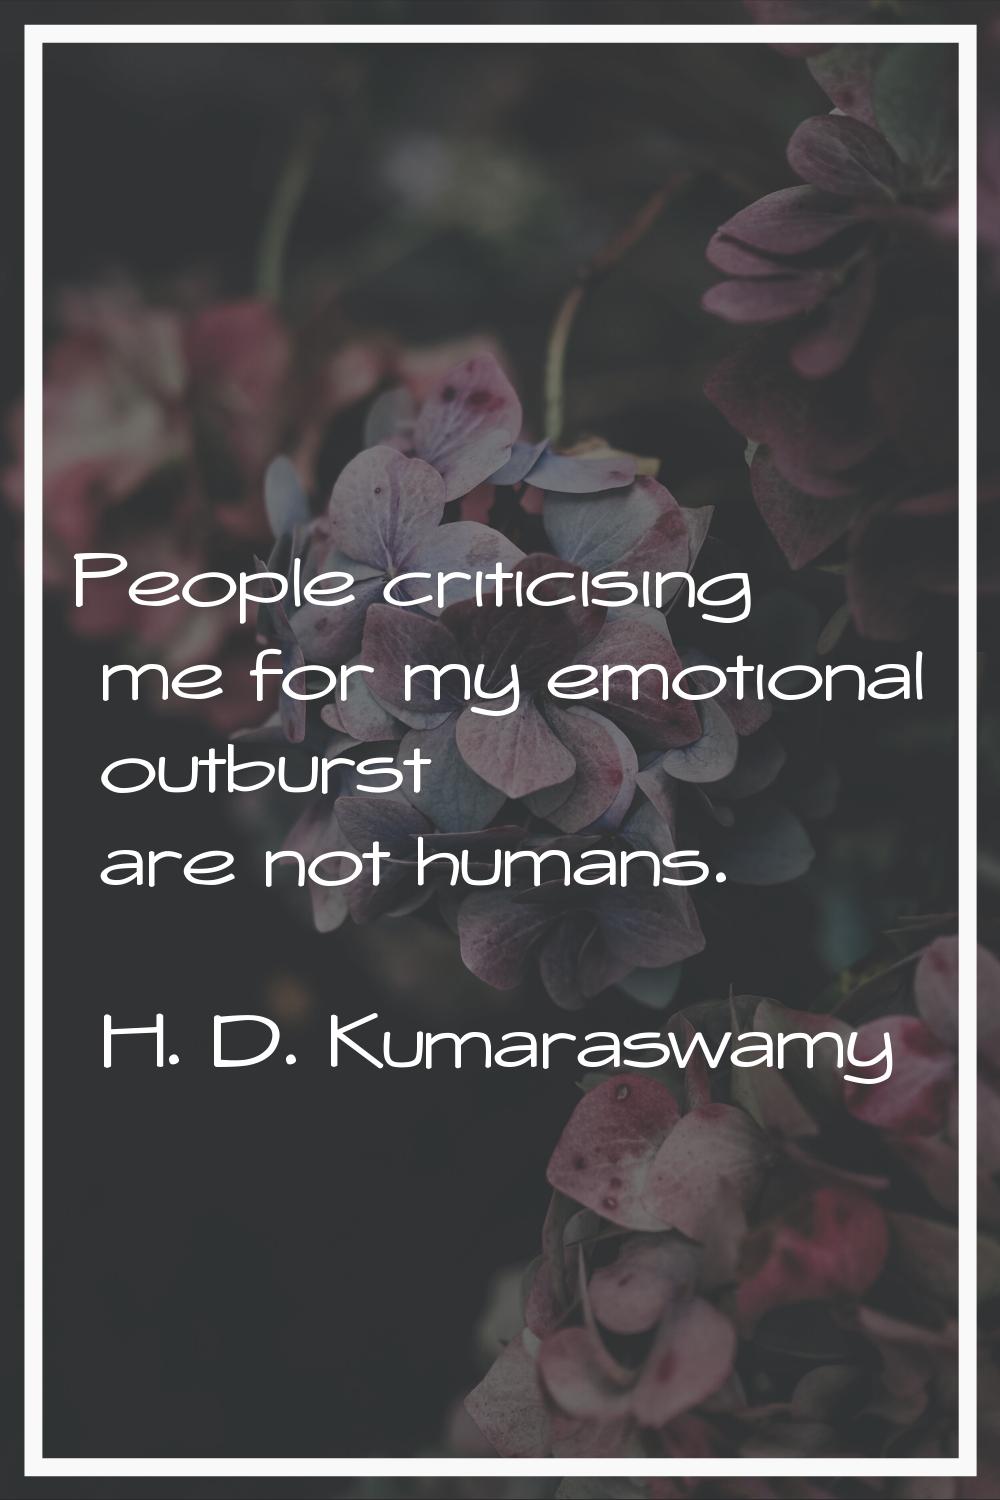 People criticising me for my emotional outburst are not humans.